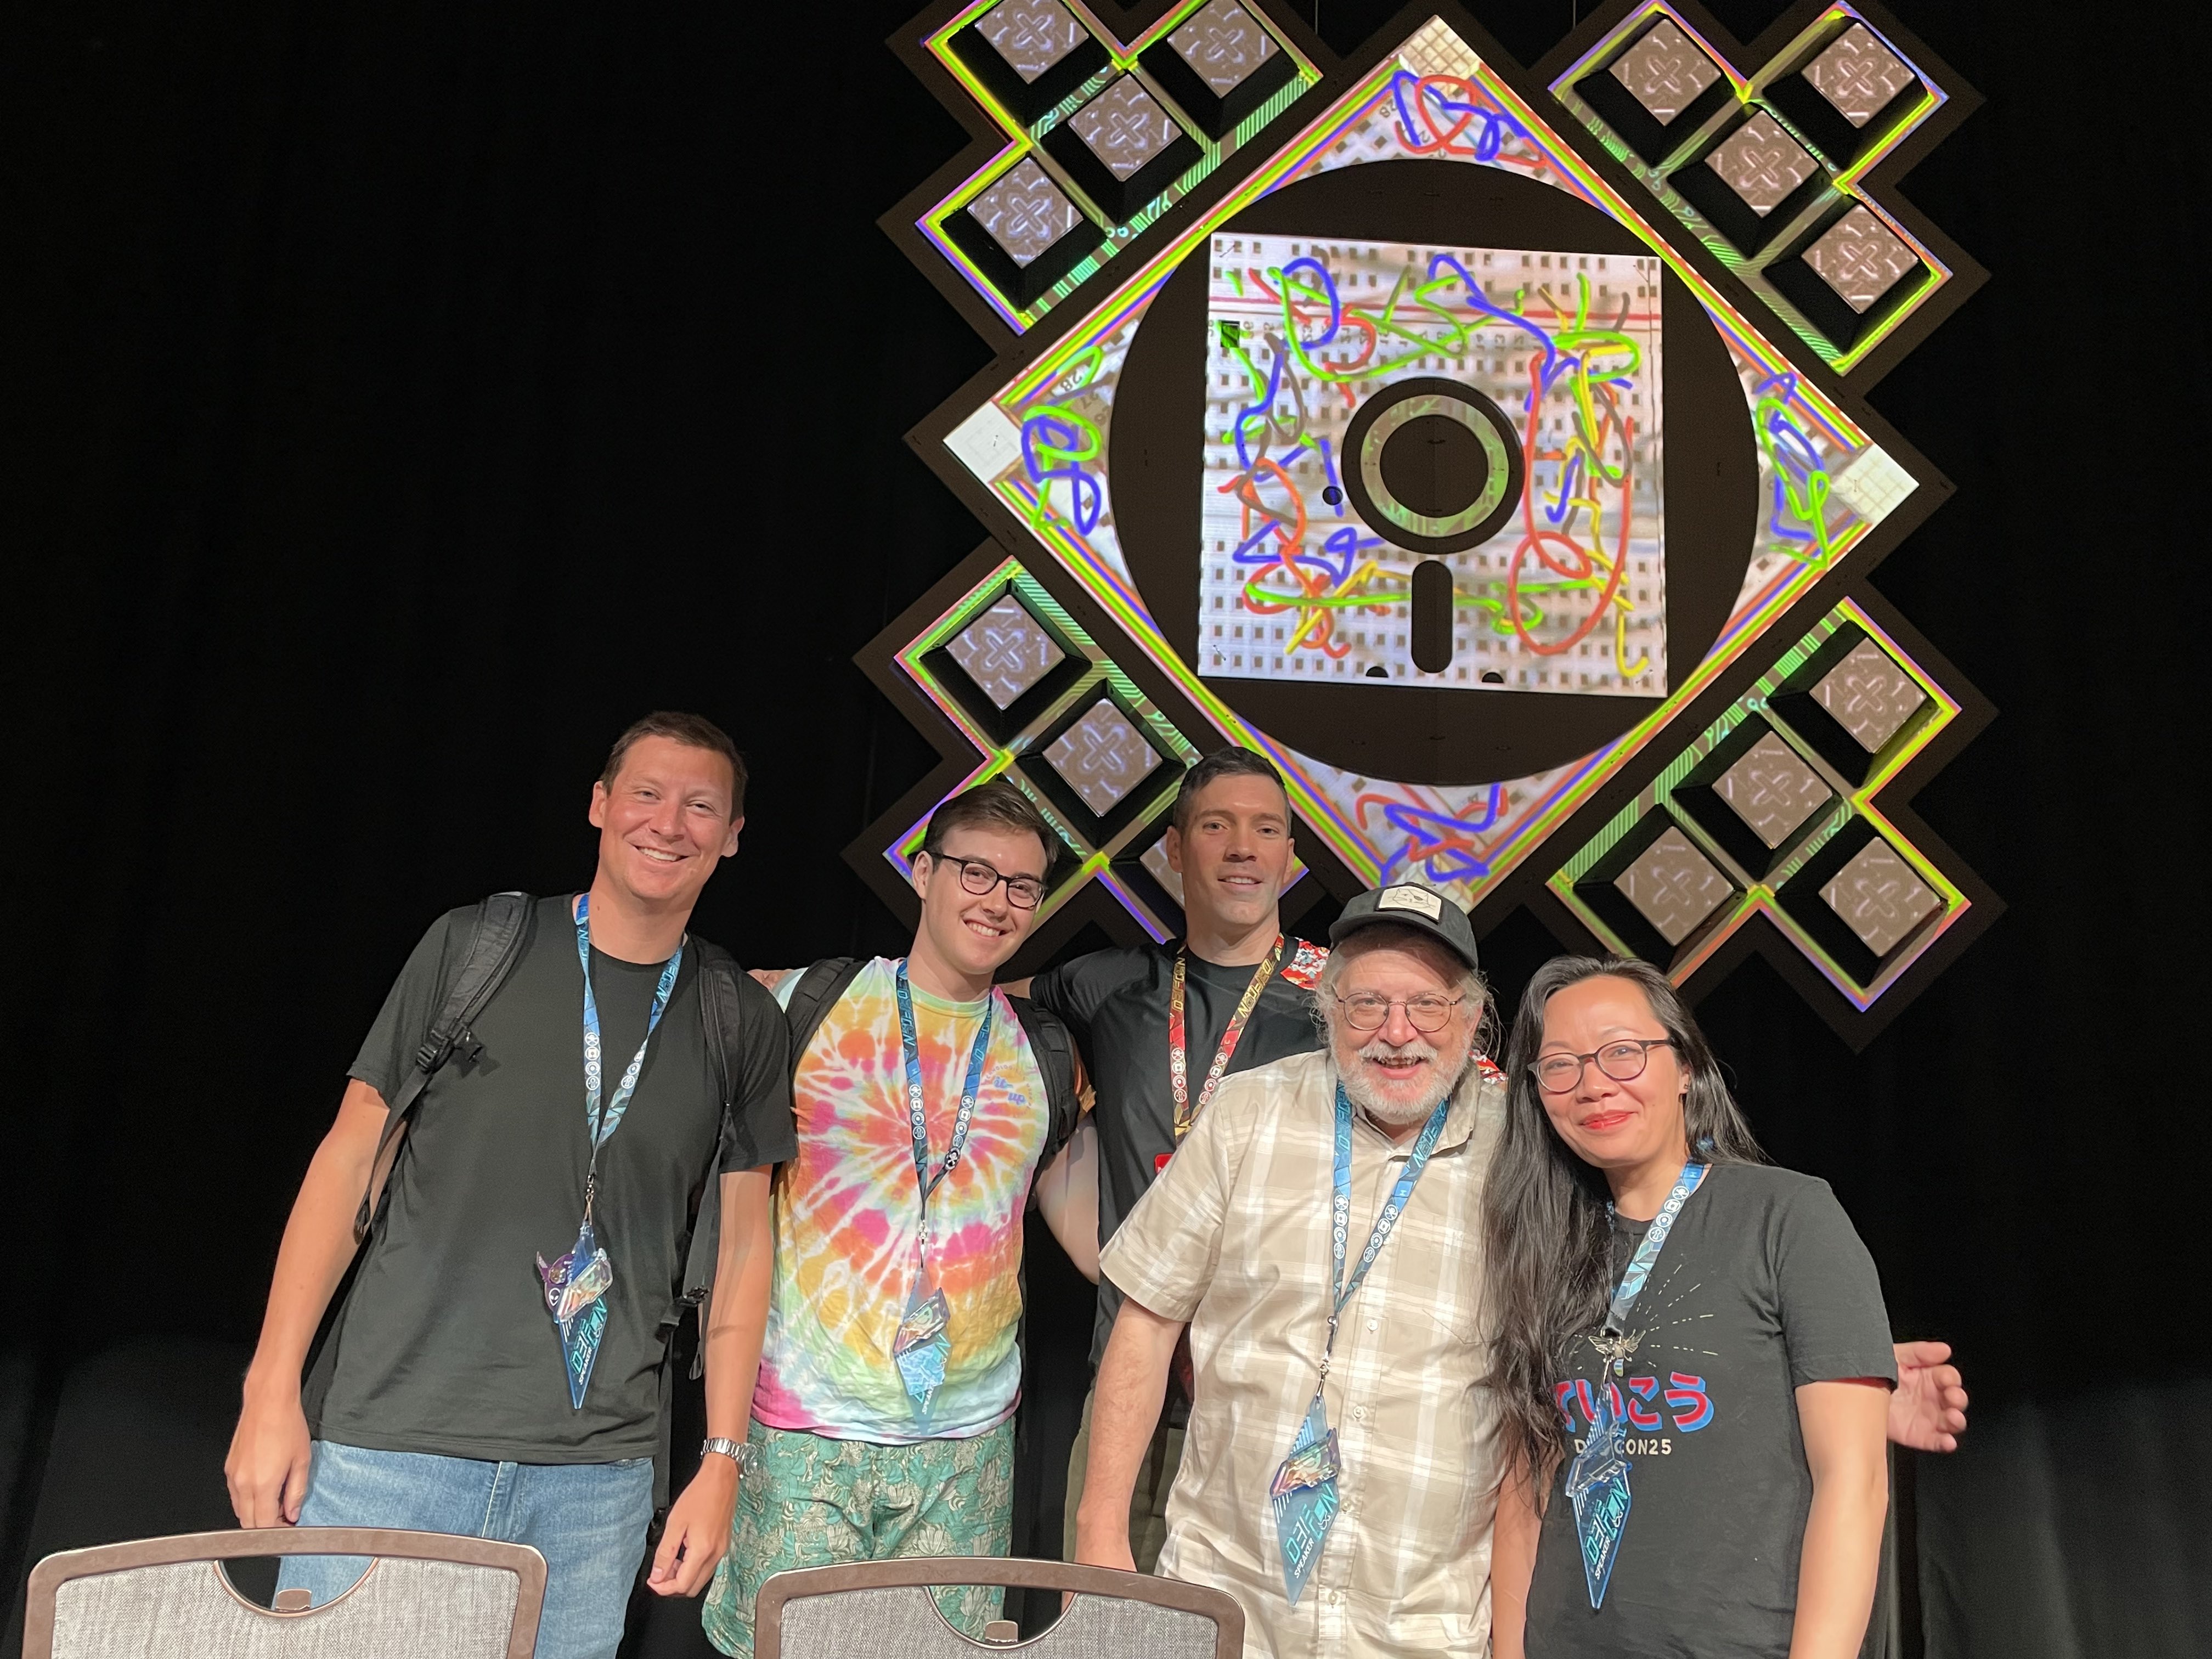 A photo of us after the talk. From left to right: Charley Snyder (Google), me, Harley Geiger (Venable), Kurt Opsahl (Filecoin Foundation), Hannah Zhao (EFF)